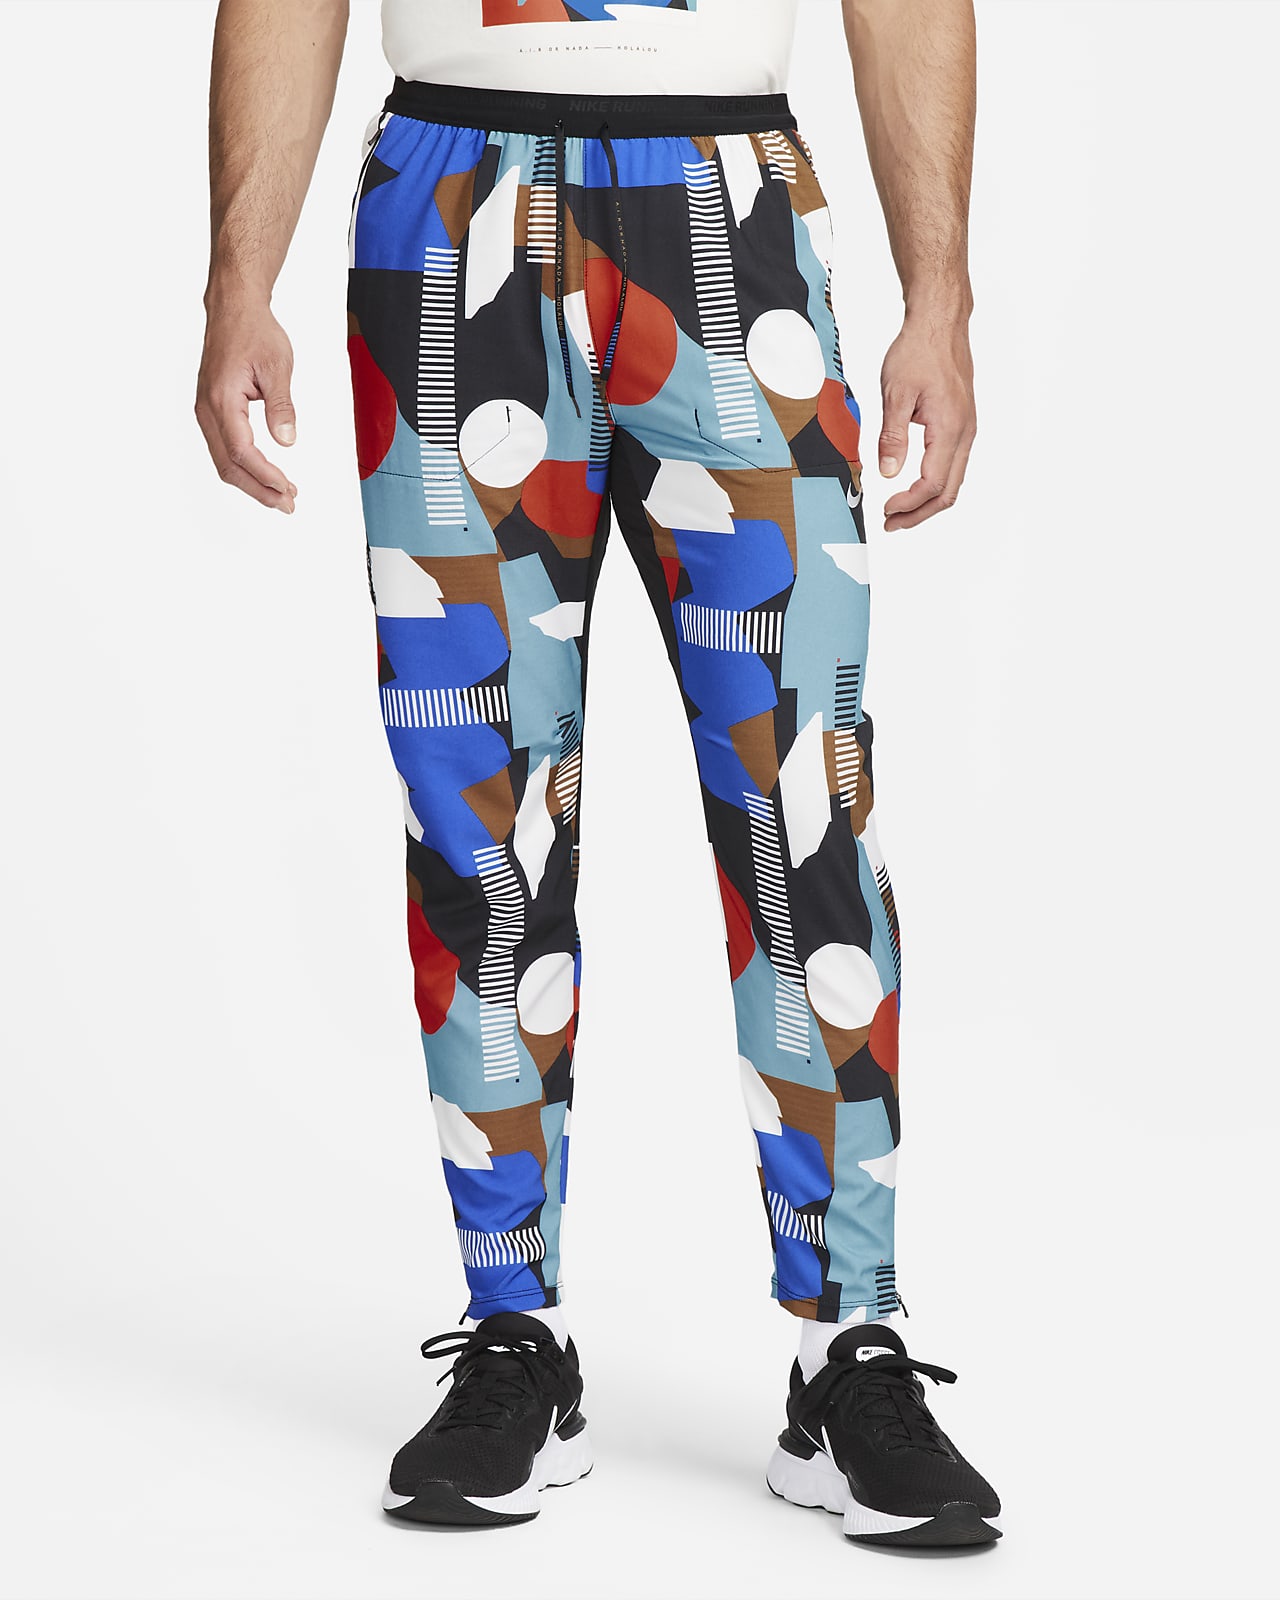 Nike A.I.R. Hola Lou Men's Running Trousers